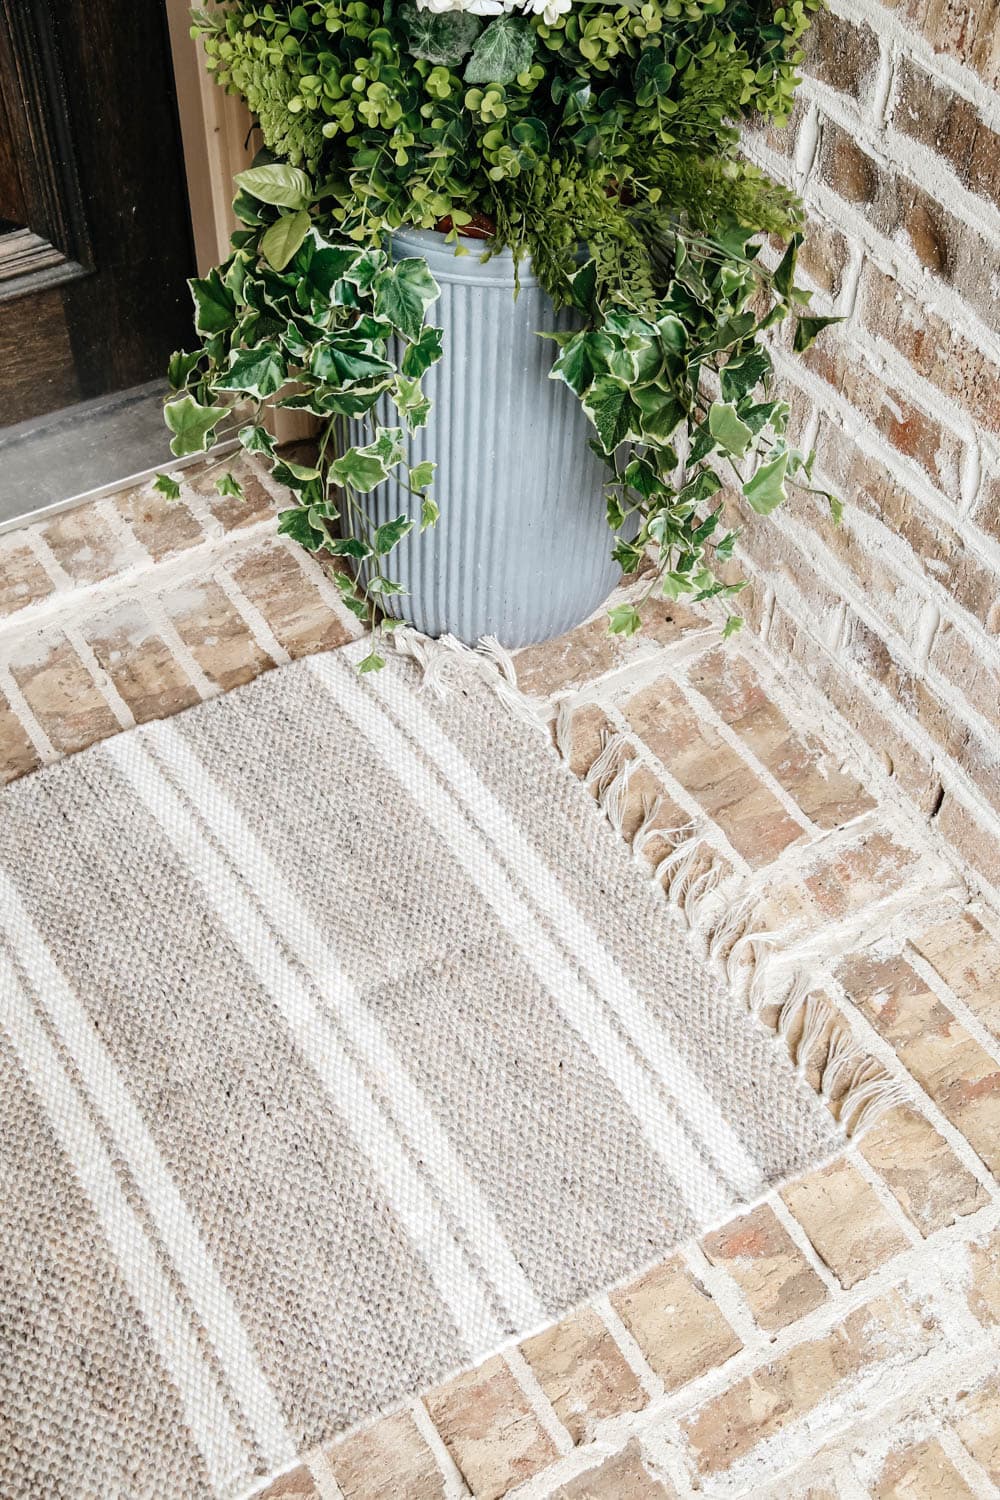 Layer your doormat with a patterned area rug for some contrast. #ABlissfulNest #fallporch